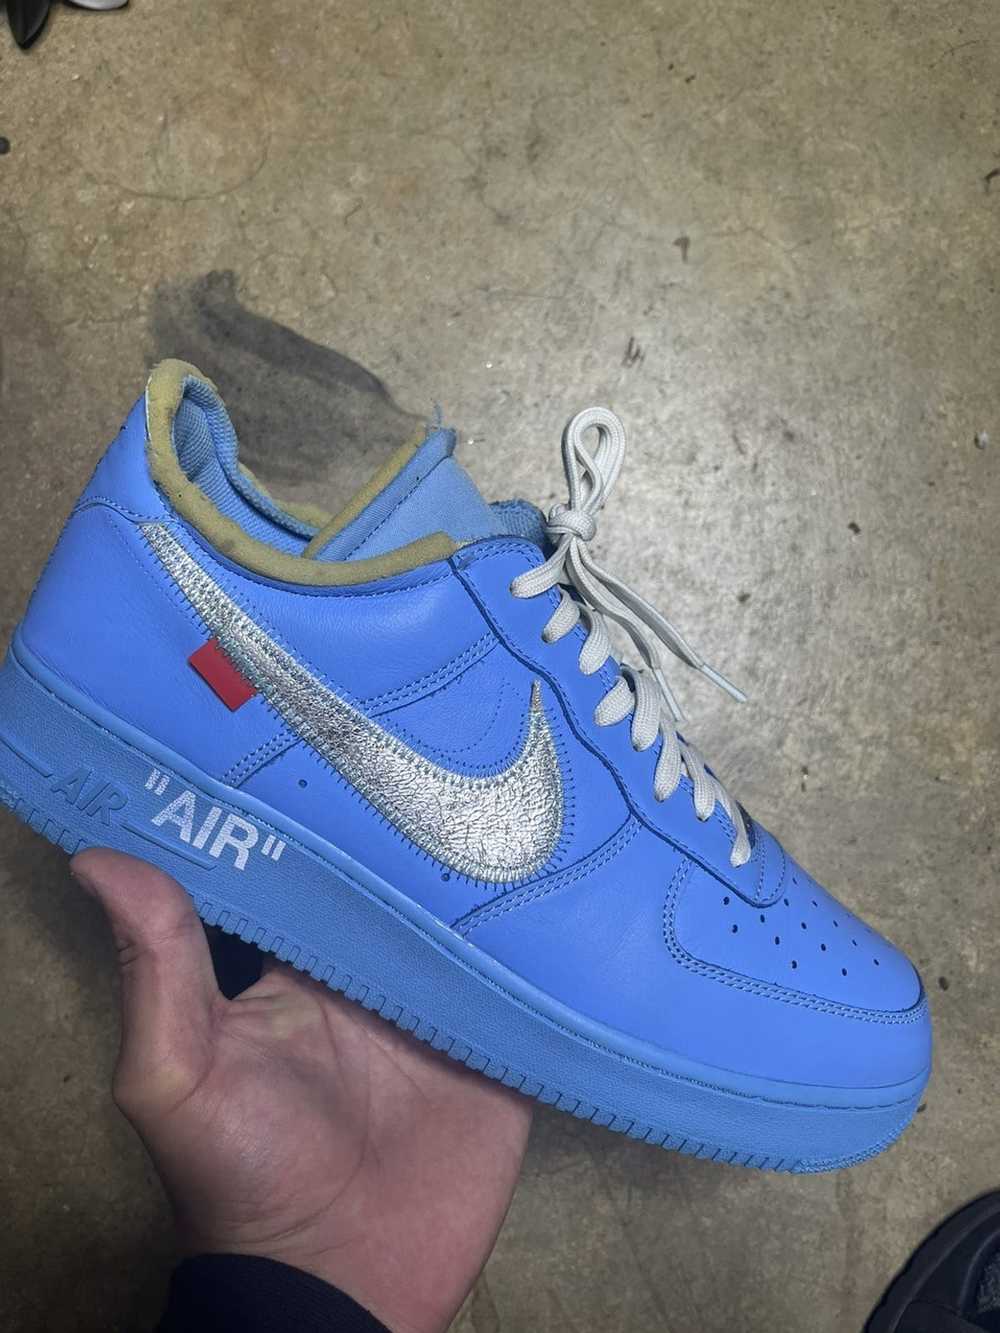 off white air force 1 low grey｜TikTok Search